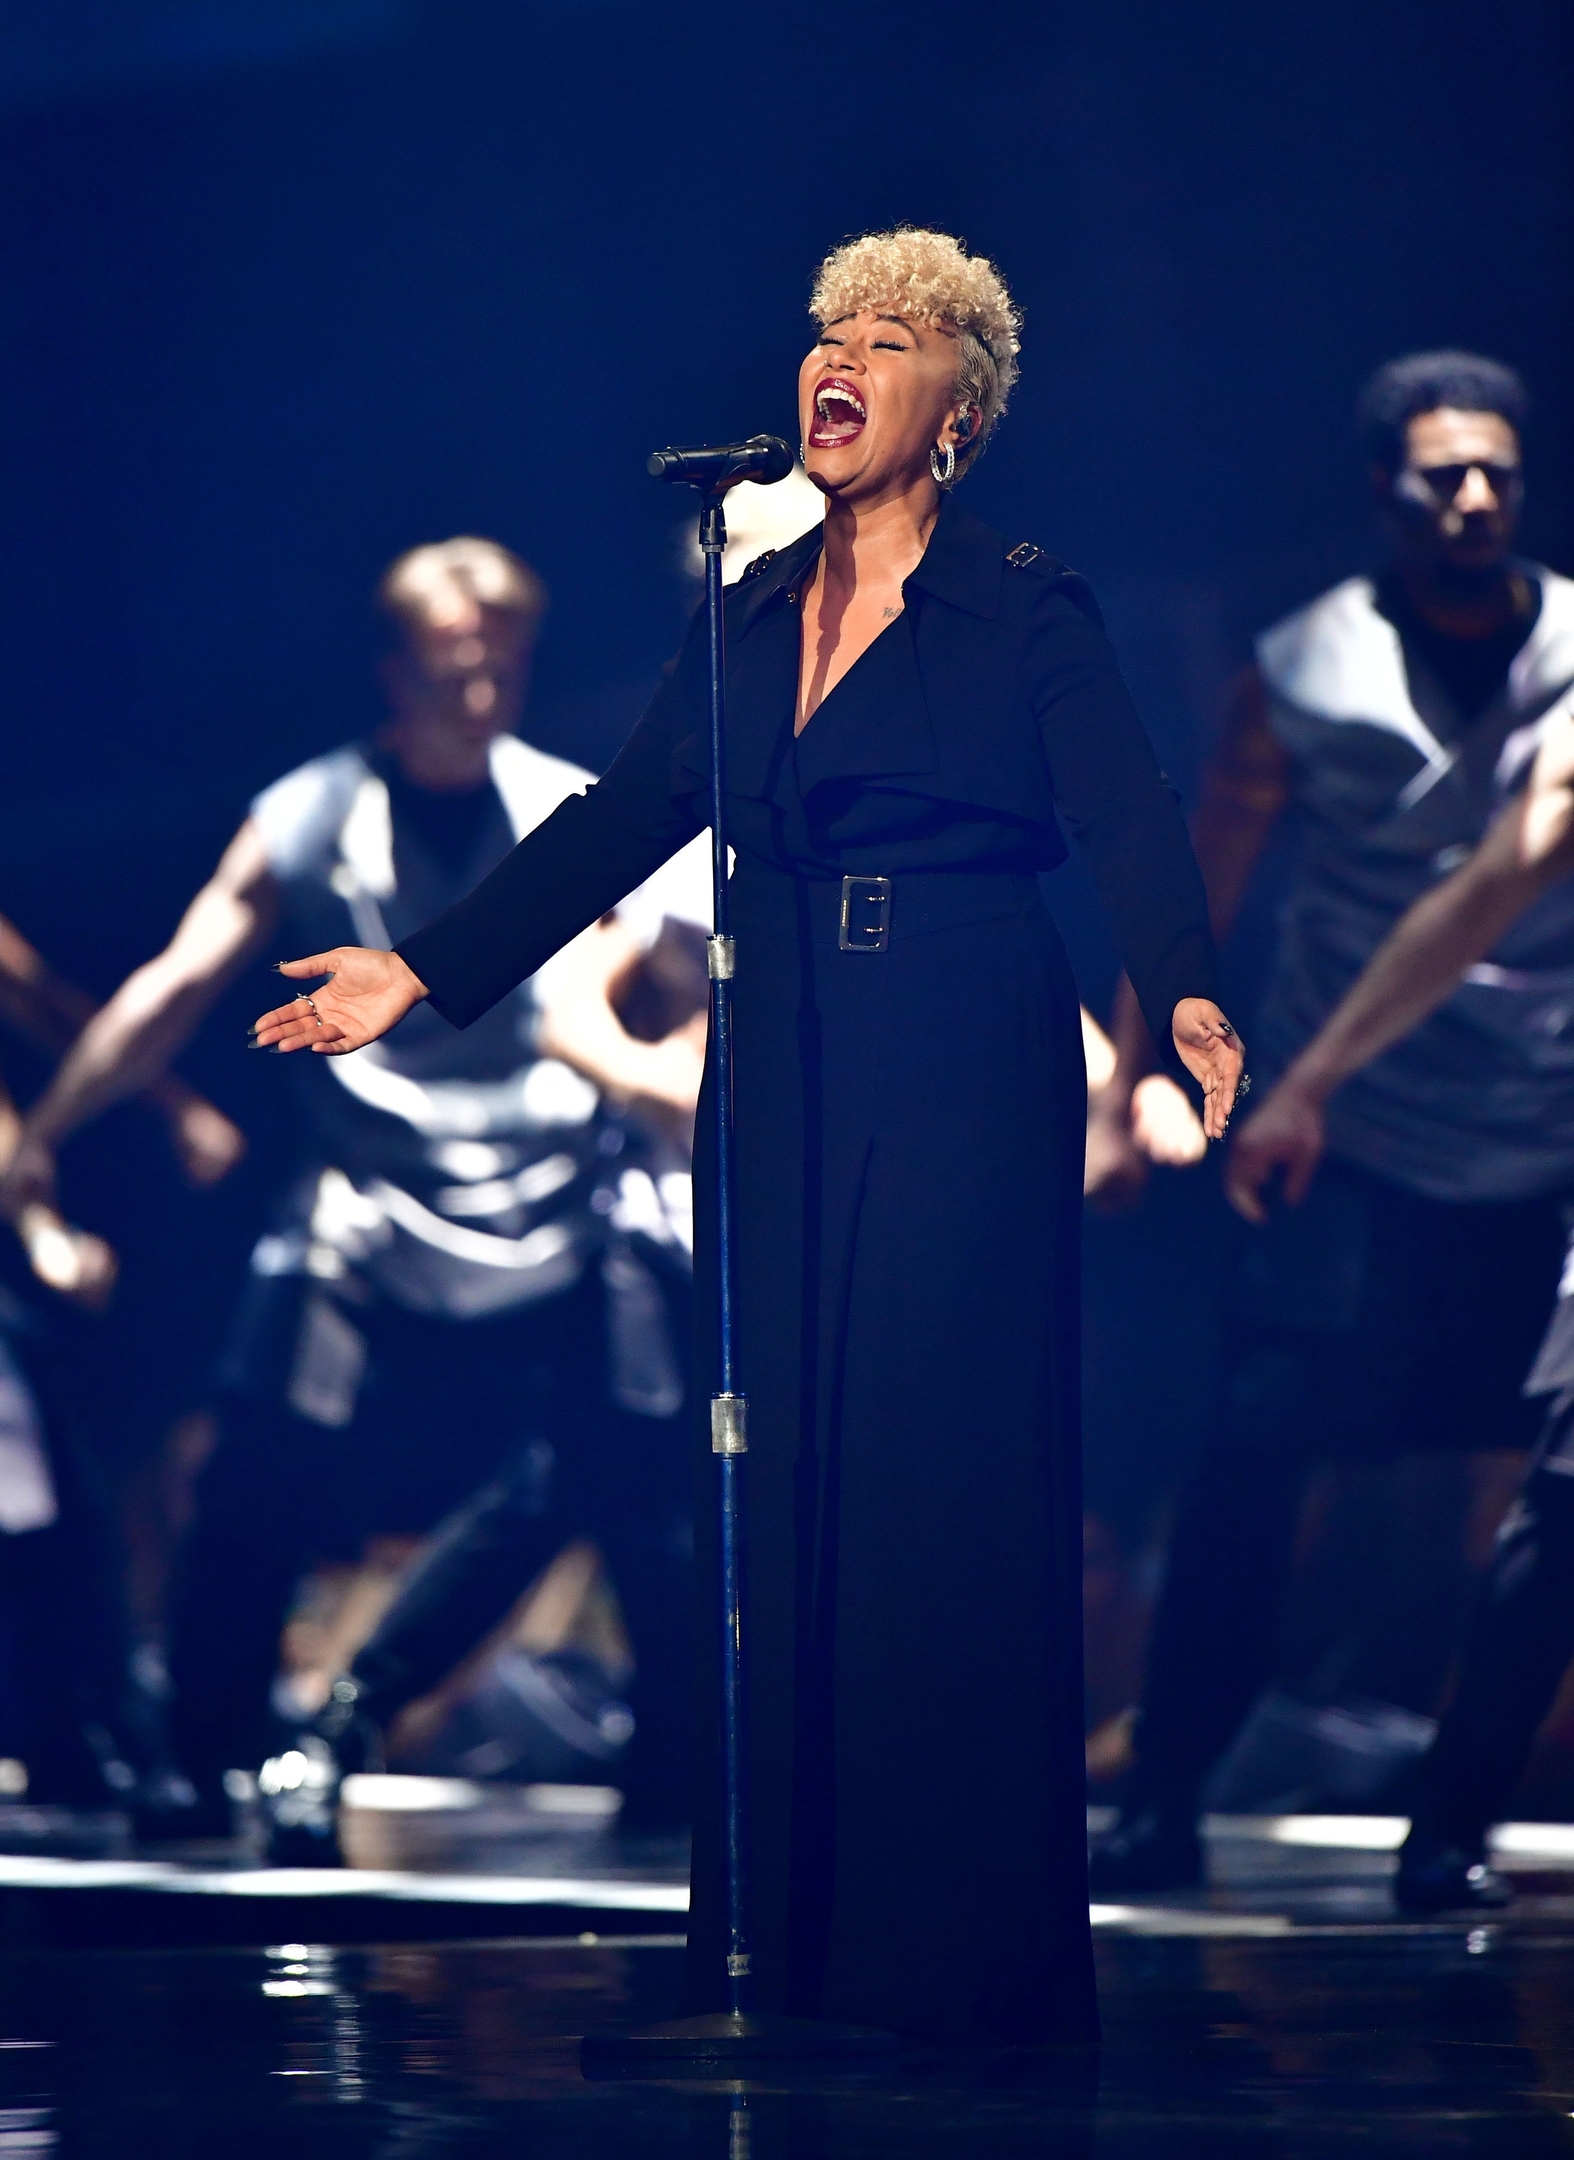 Emeli Sande performing on stage at the Brit Awards at the O2 Arena